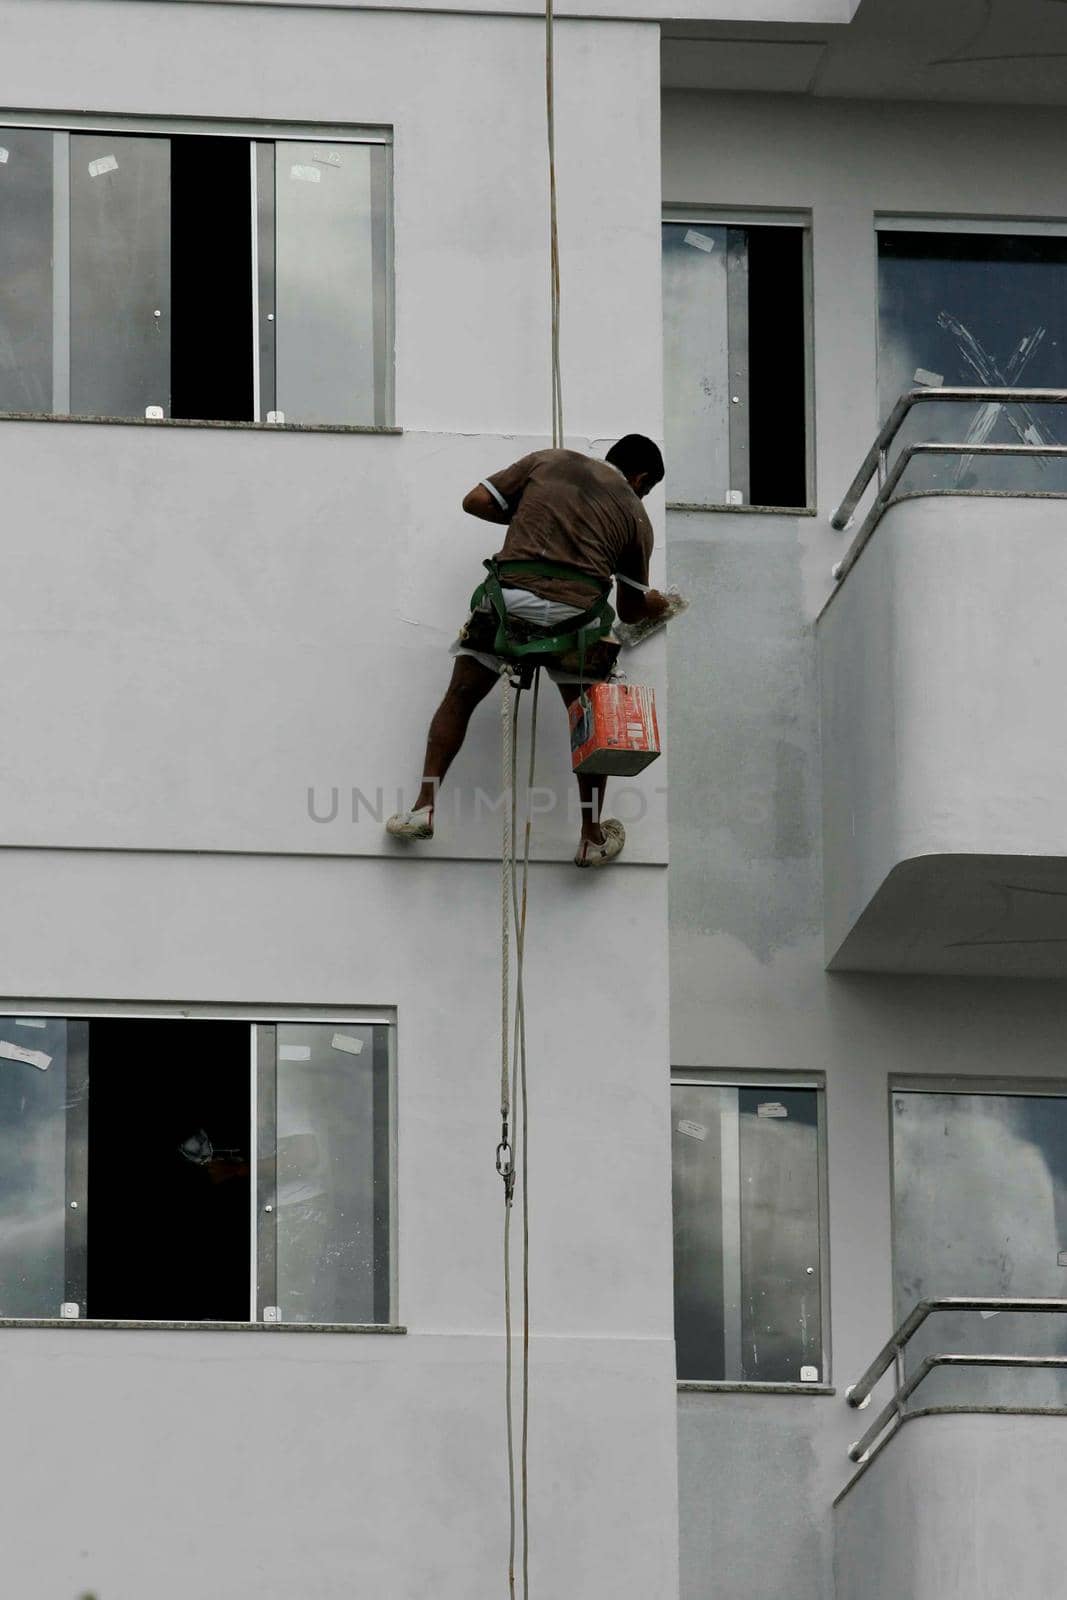 eunapolis, bahia / brazil - august 25, 2009: Wall painter is seen hanging during painting of a building in the city of Eunapolis.